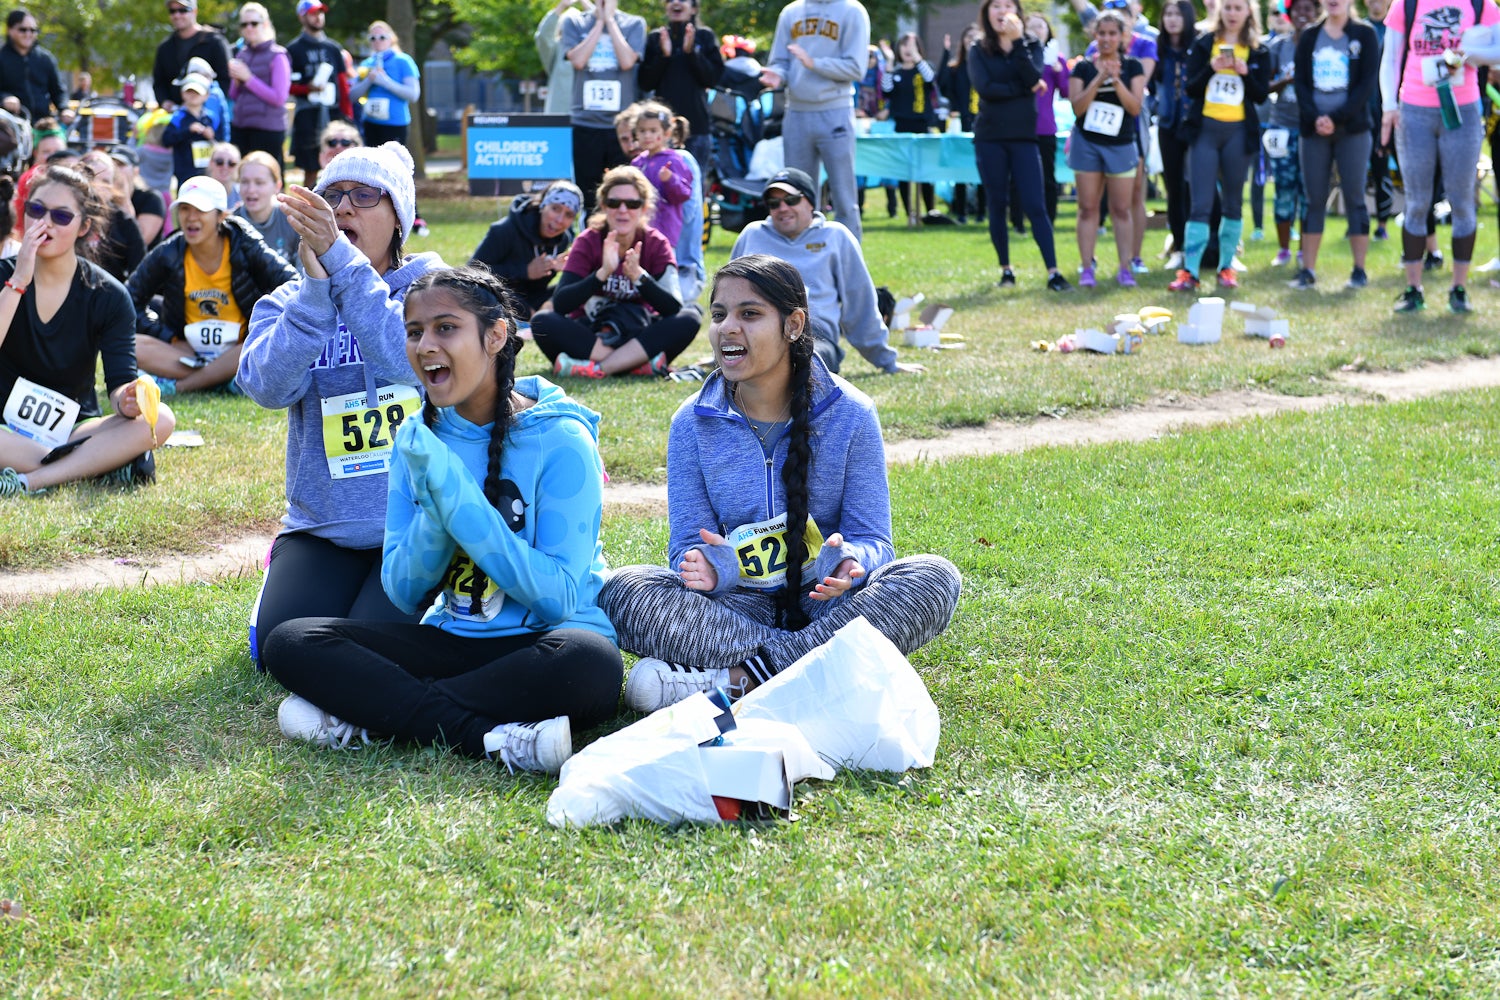 Fun Run participants sitting on the grass laughing